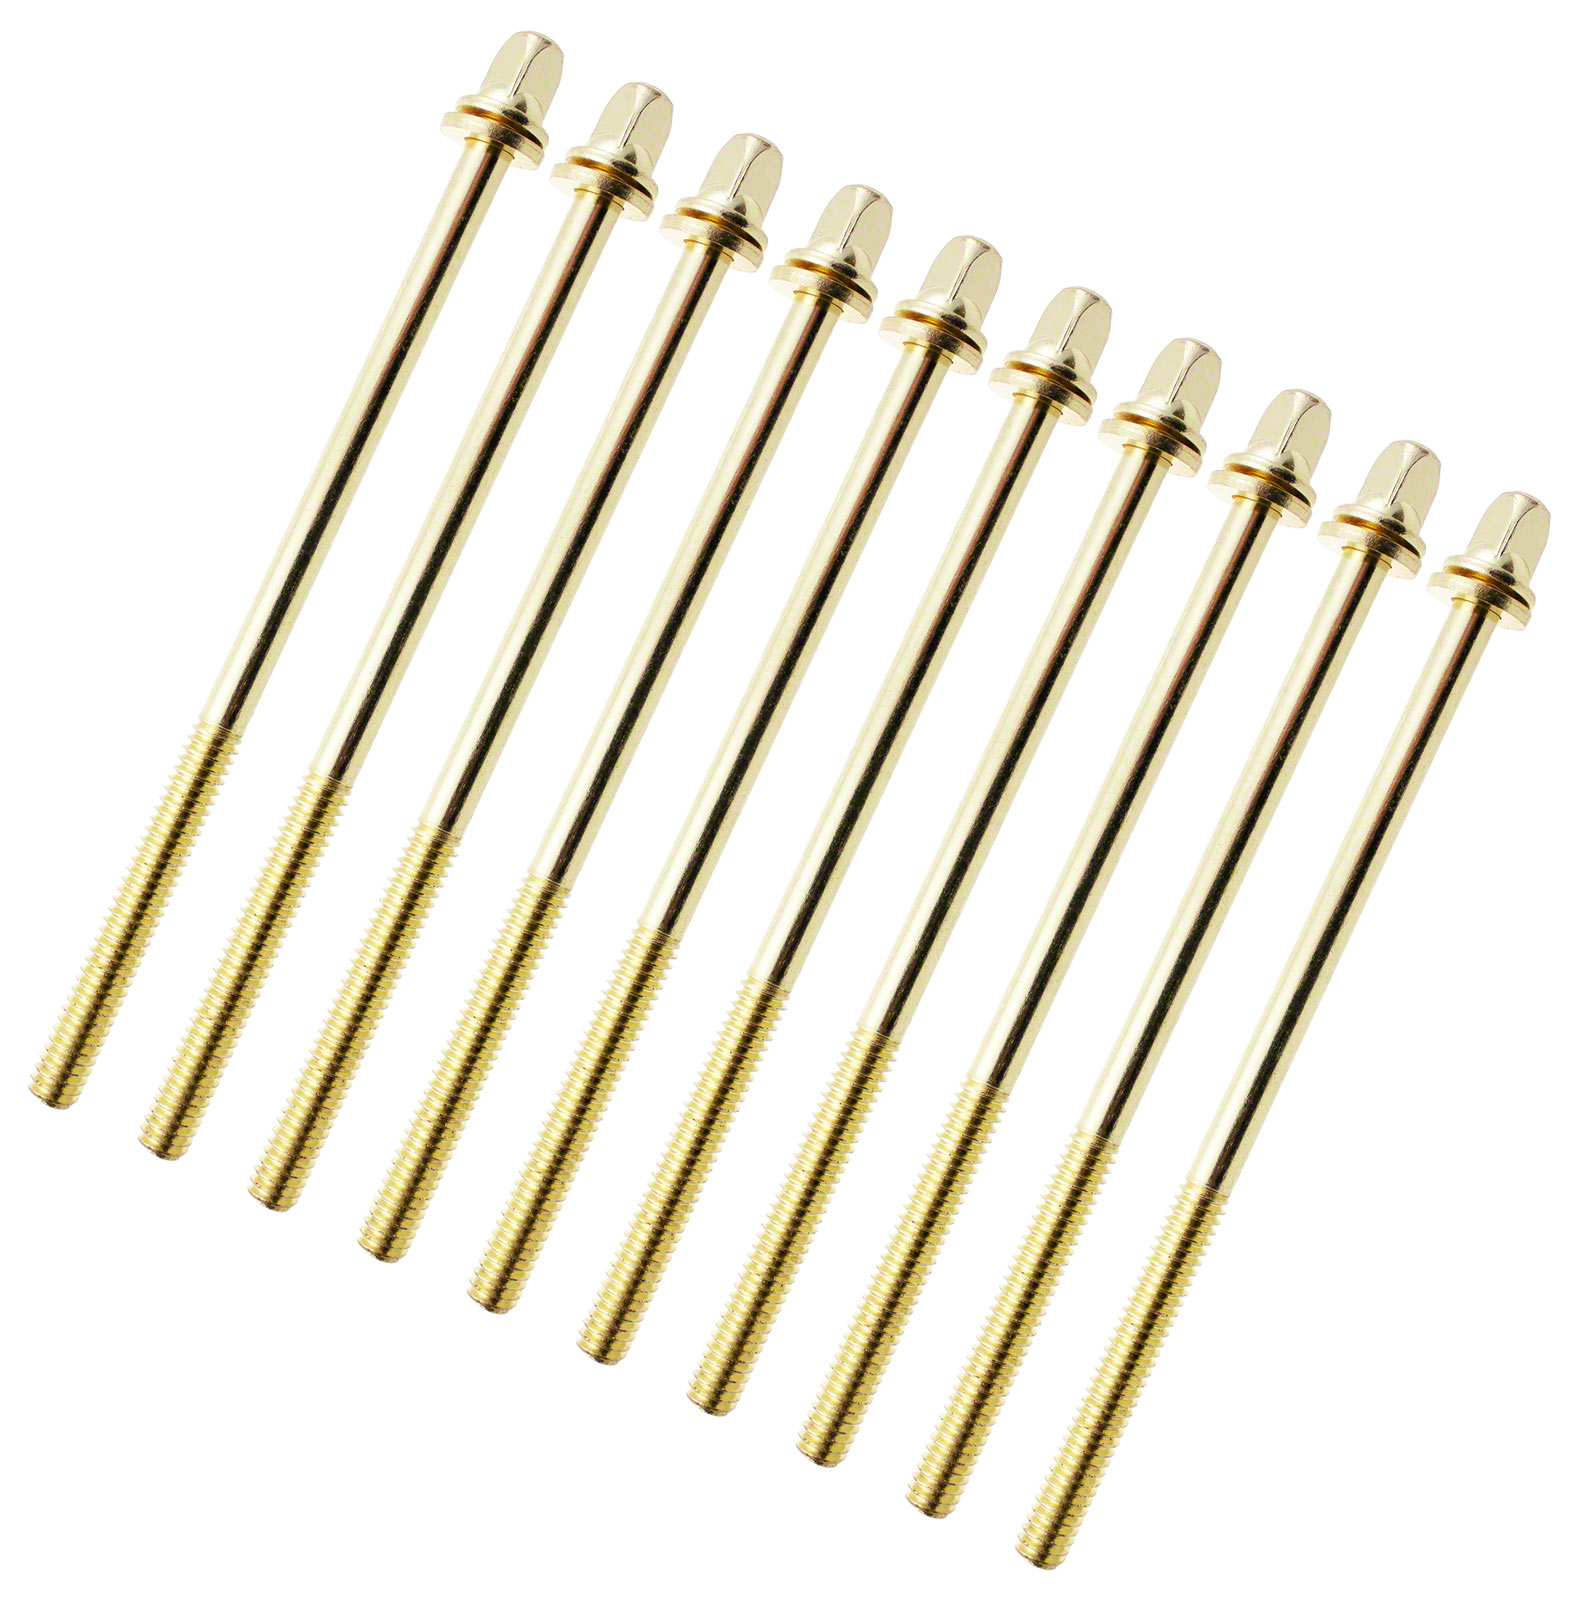 SPAREDRUM TRC-102W-BR - 102MM TENSION ROD BRASS WITH WASHER - 7/32